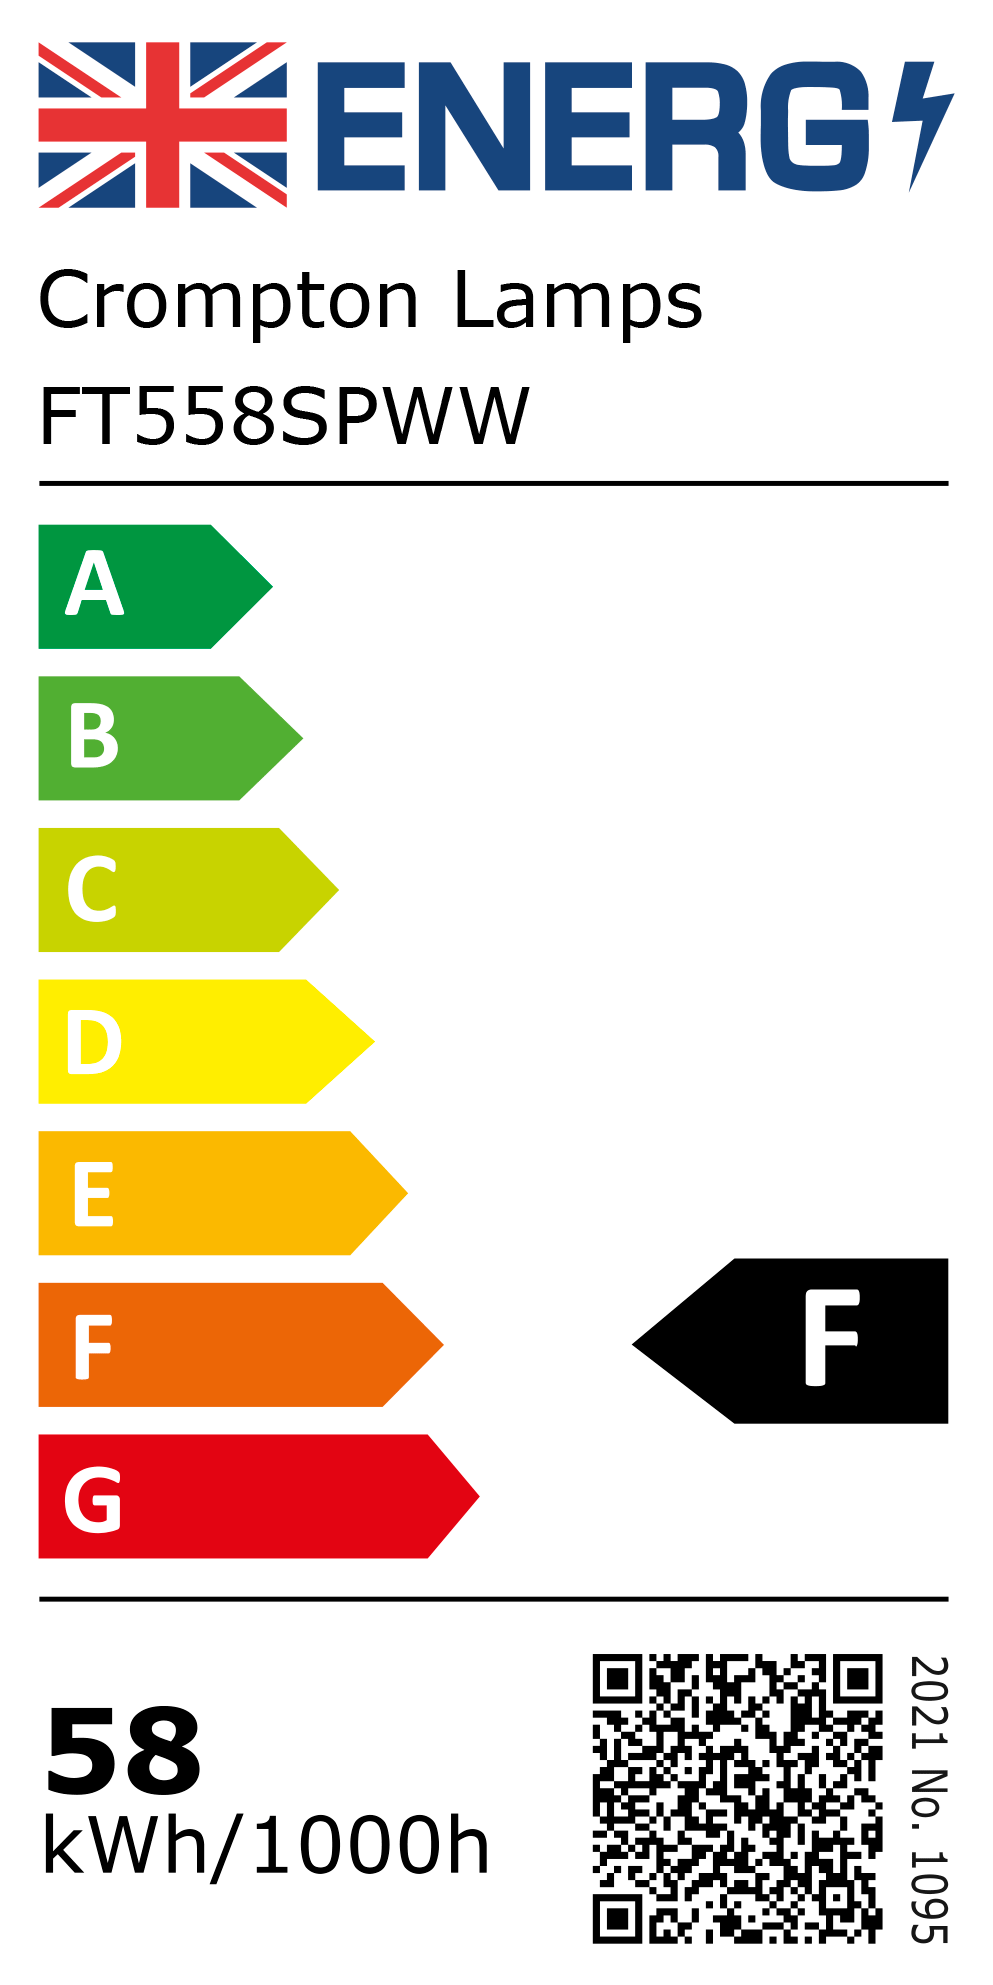 New 2021 Energy Rating Label: Stock Code FT558SPWW